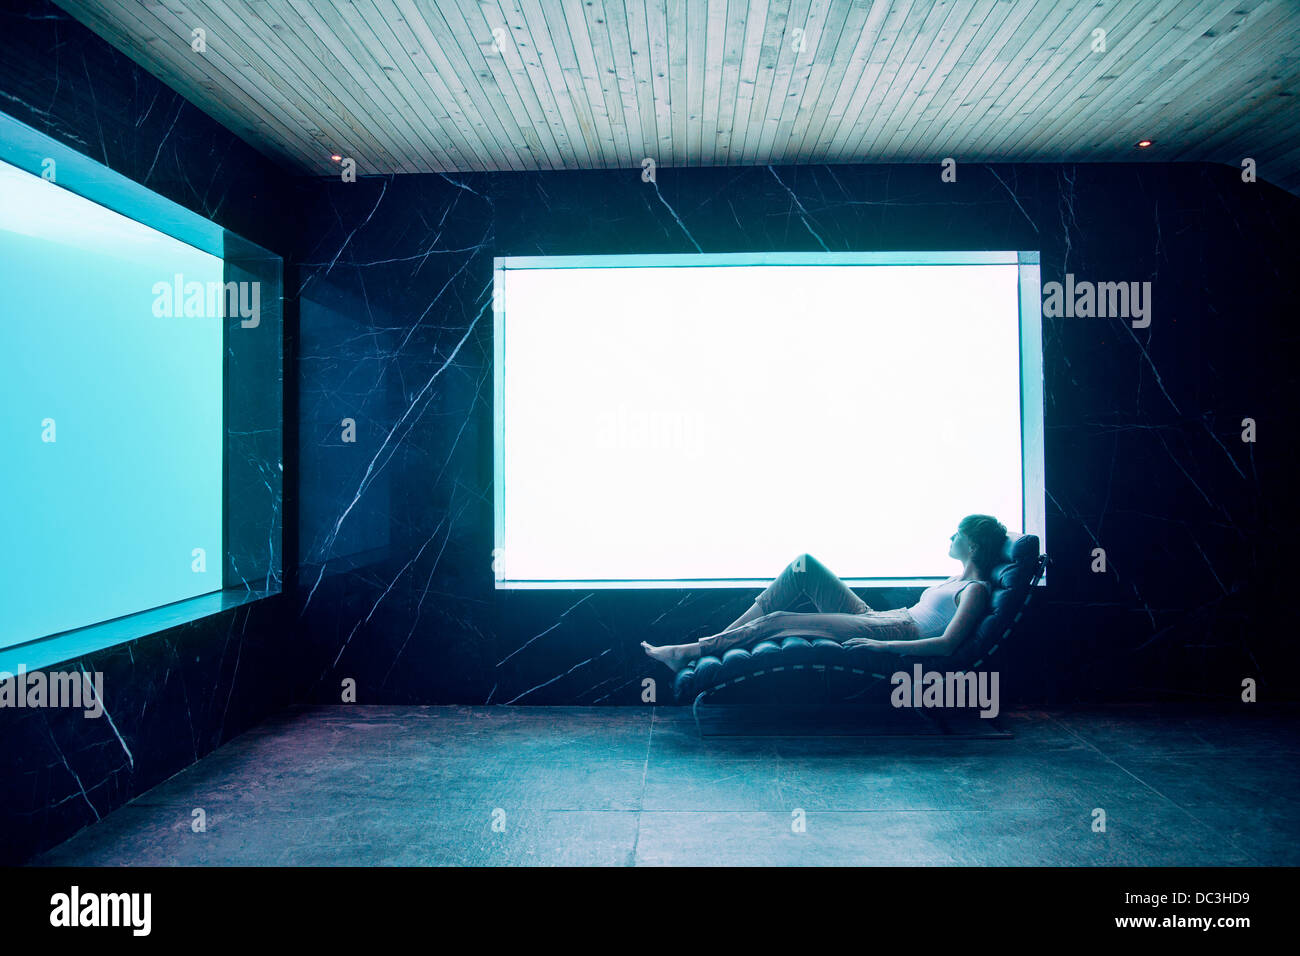 Woman in lounge chair in pool room Stock Photo